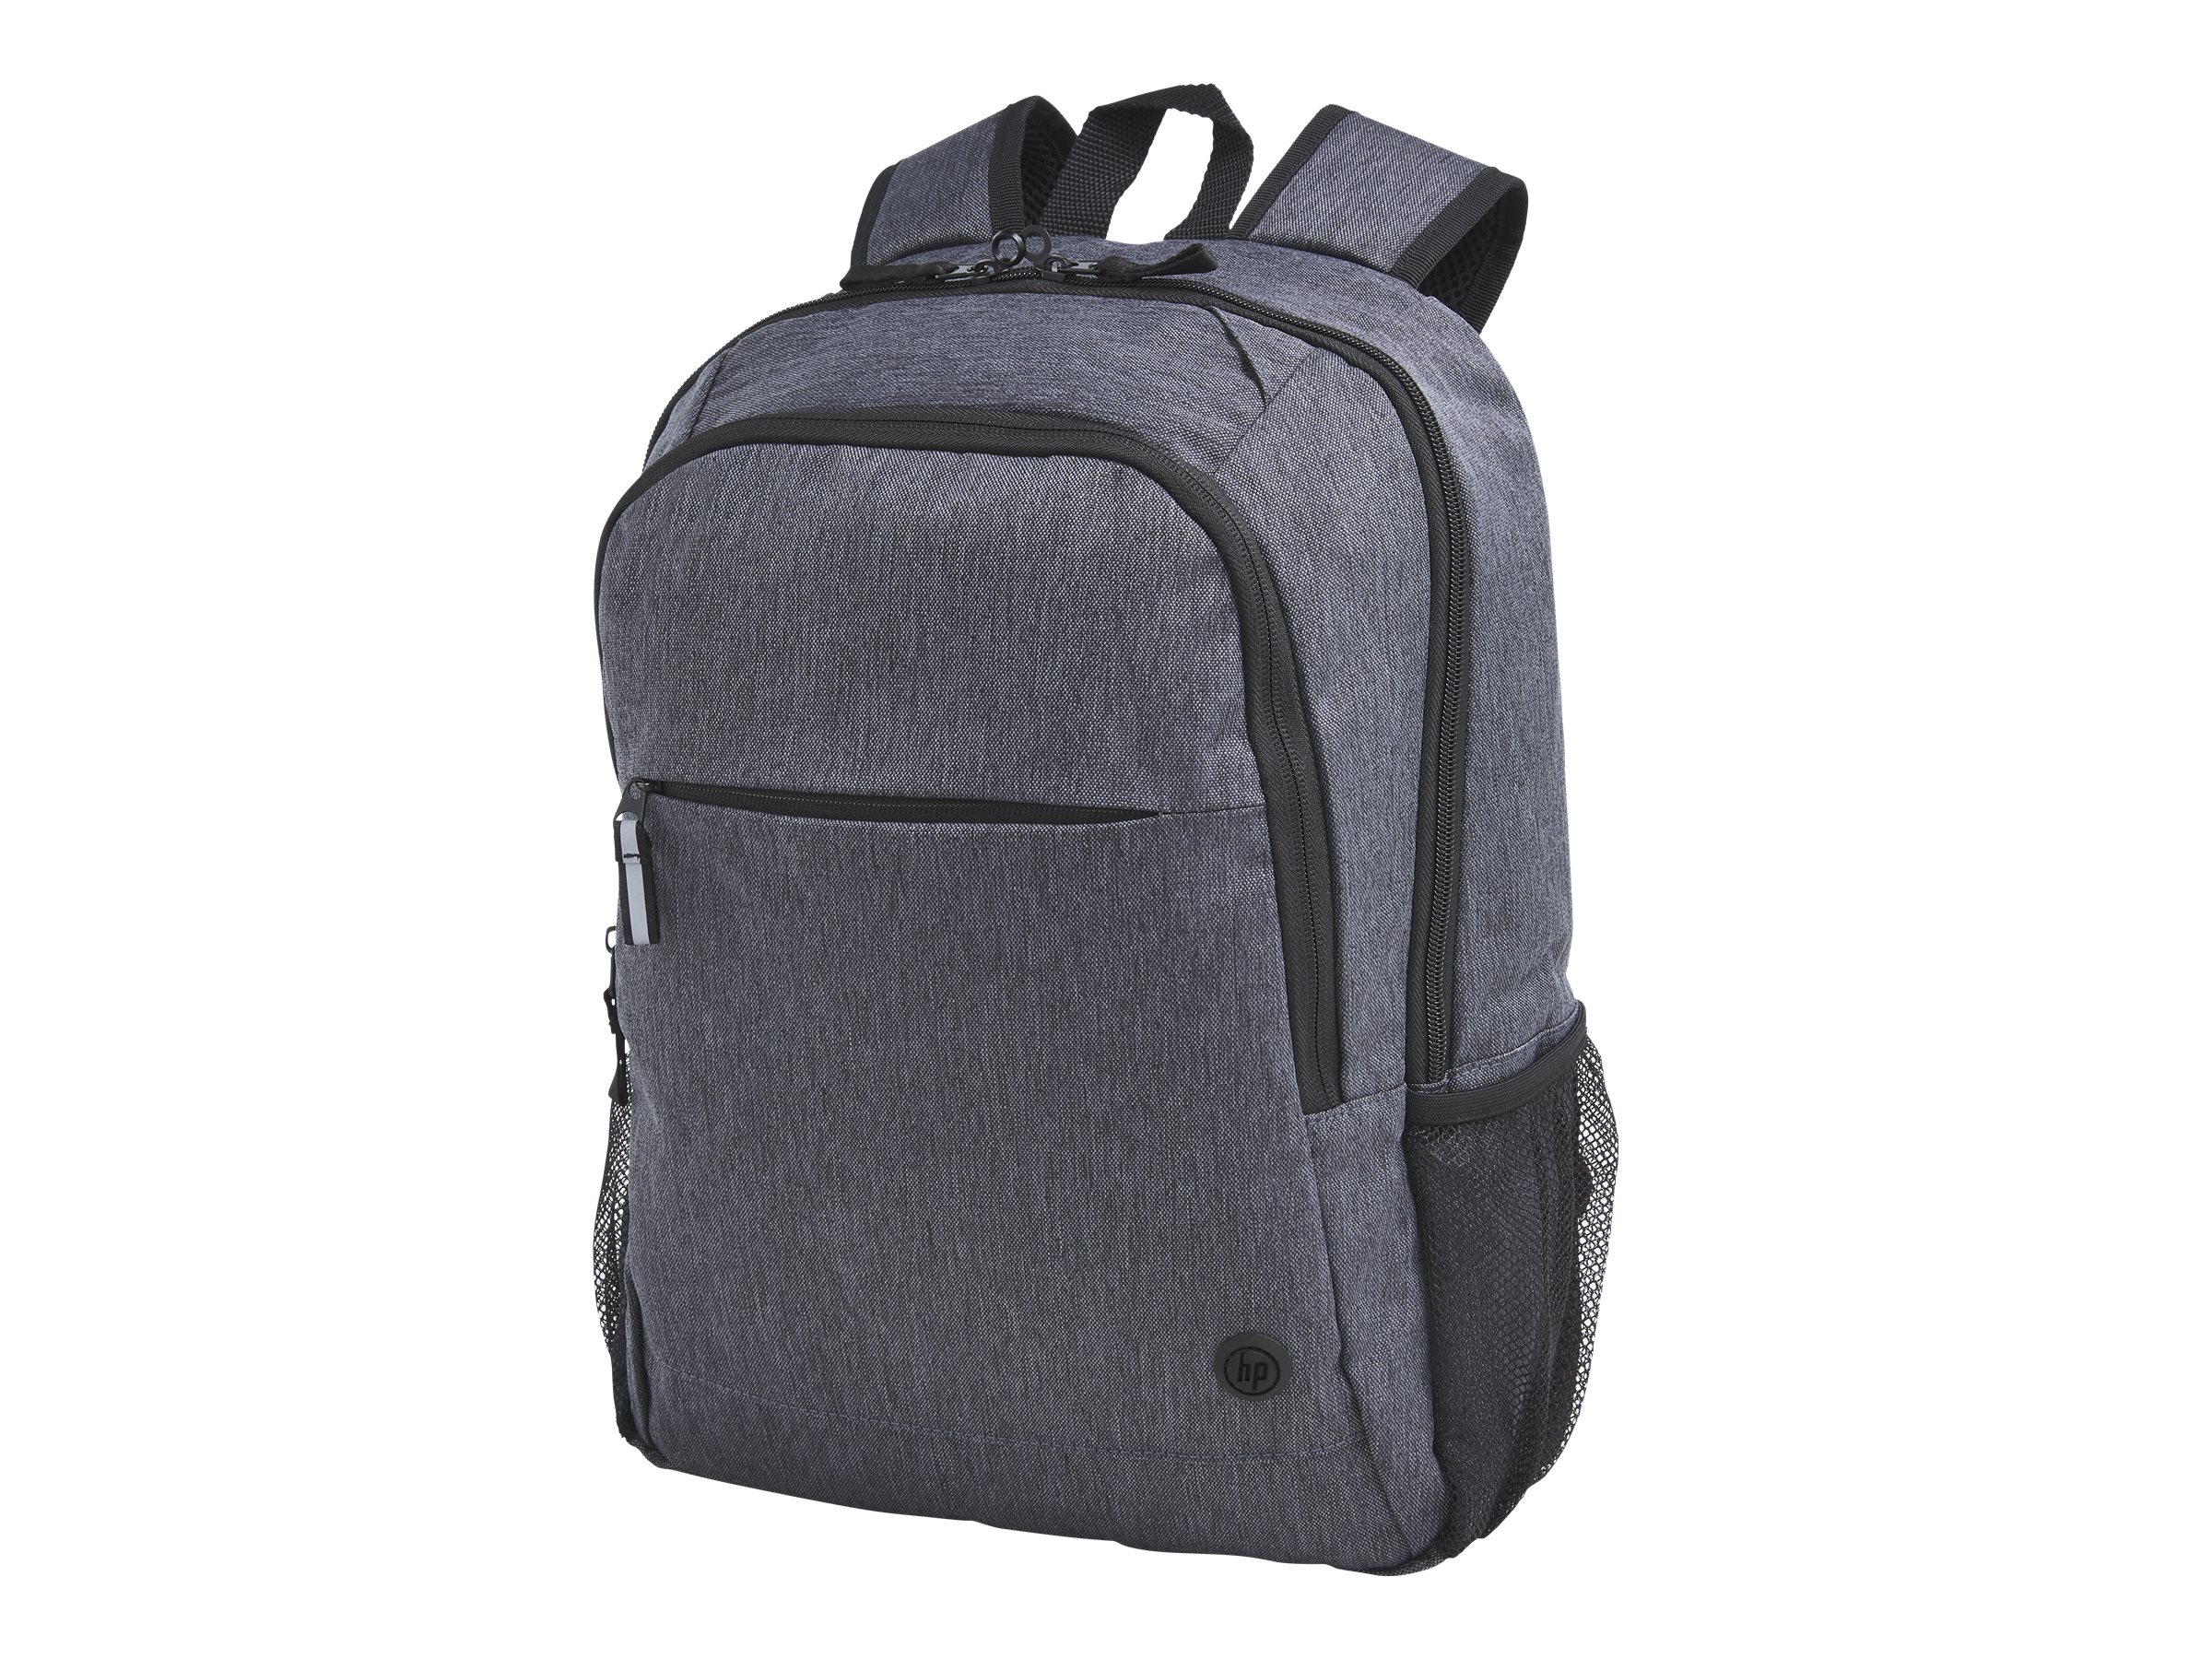 Prelude carrying - Pro backpack Notebook HP